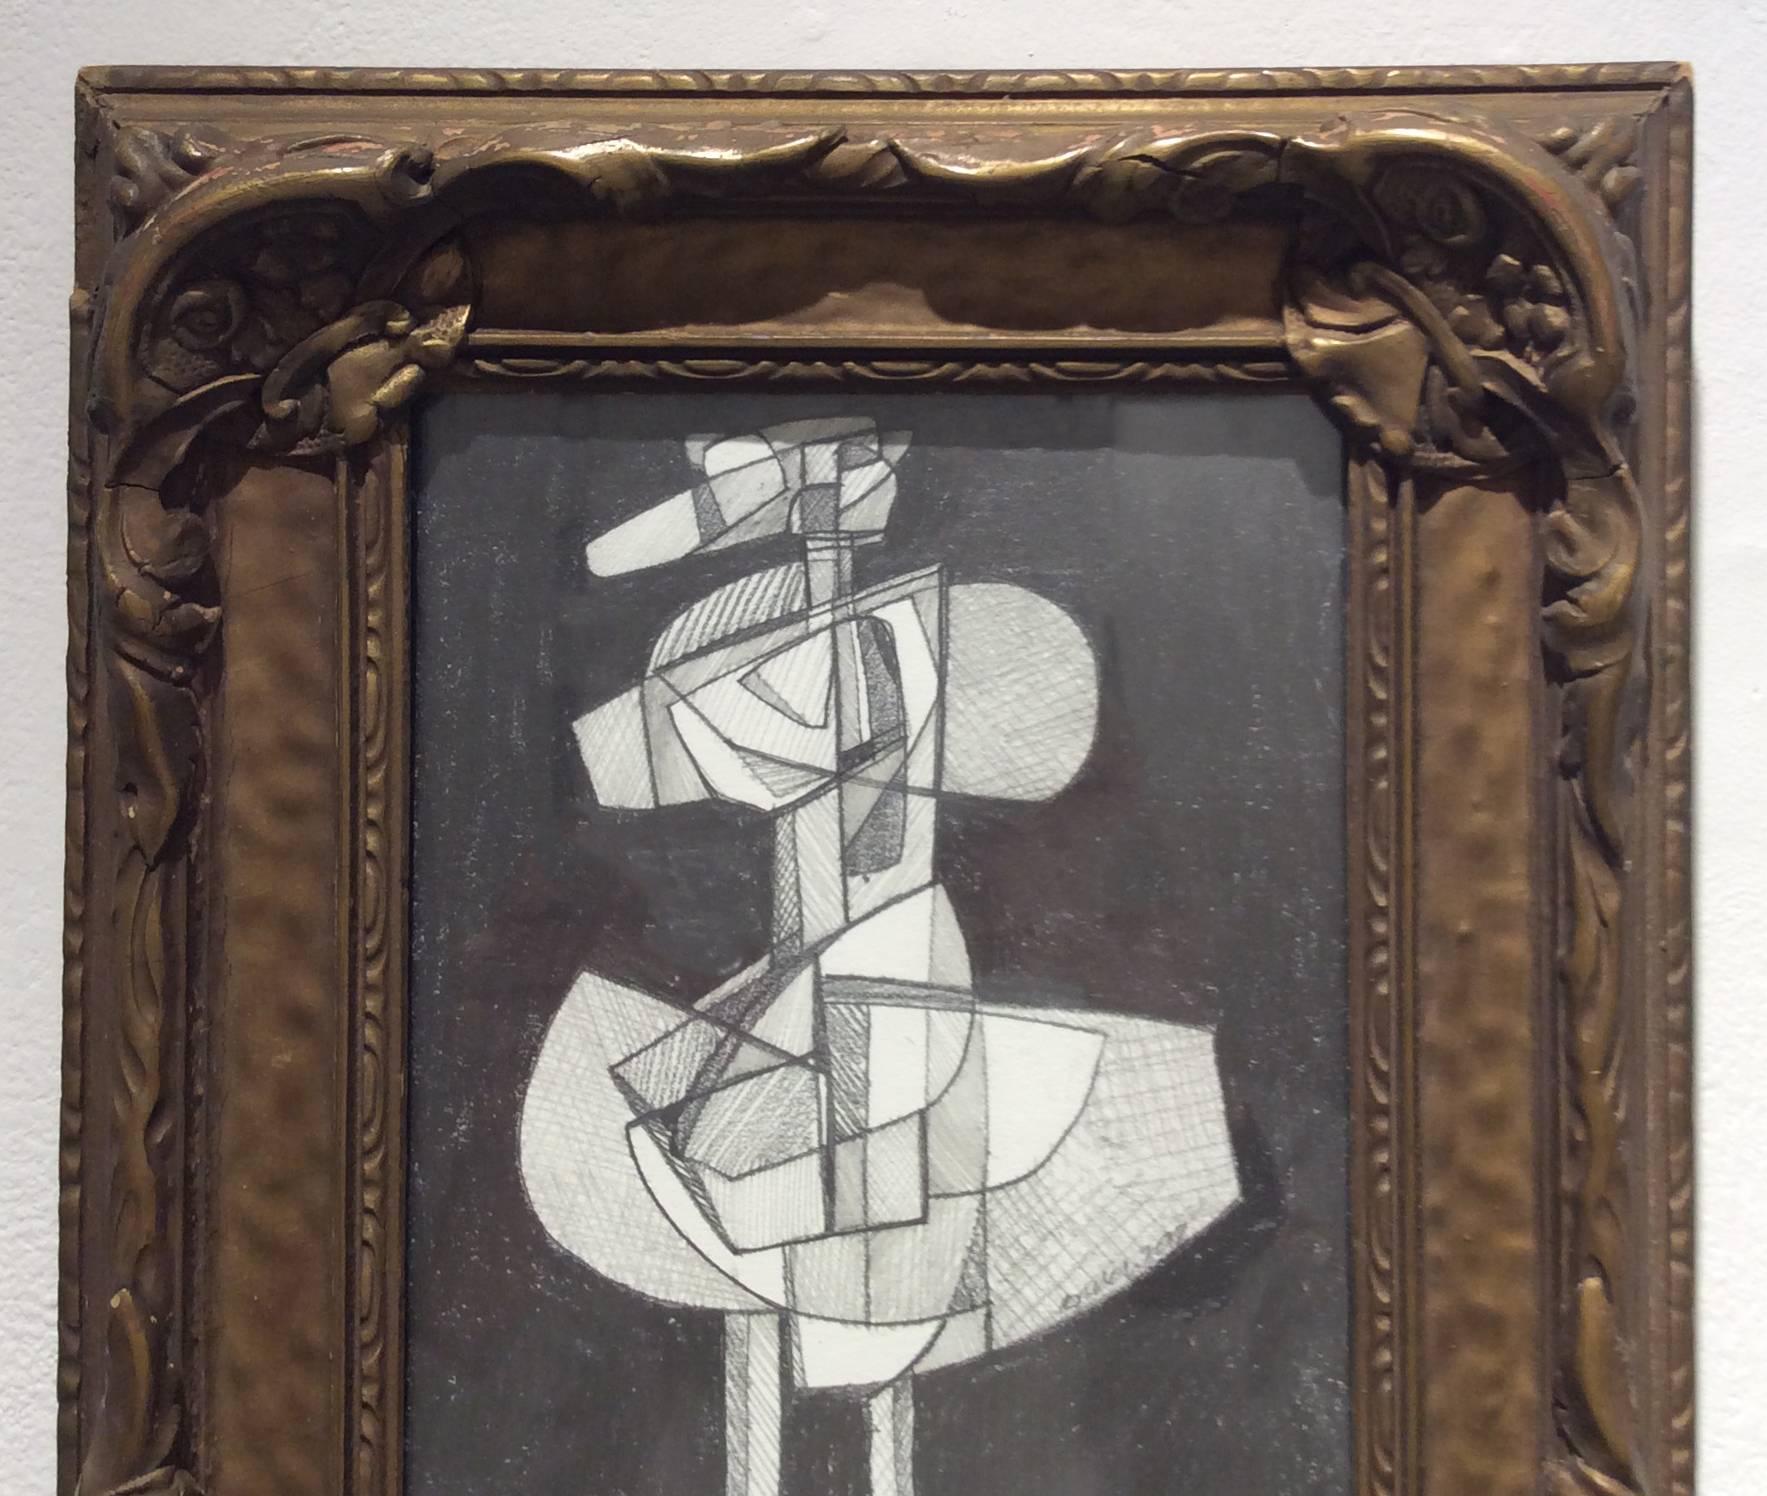 Abstract graphite drawing on paper in antique Victorian frame
11.5 x 9.5 inches framed 

This abstract figurative graphite drawing on paper was inspired by academic paintings of the Infanta Margarita. The work is drawn in an abstracted cubist style